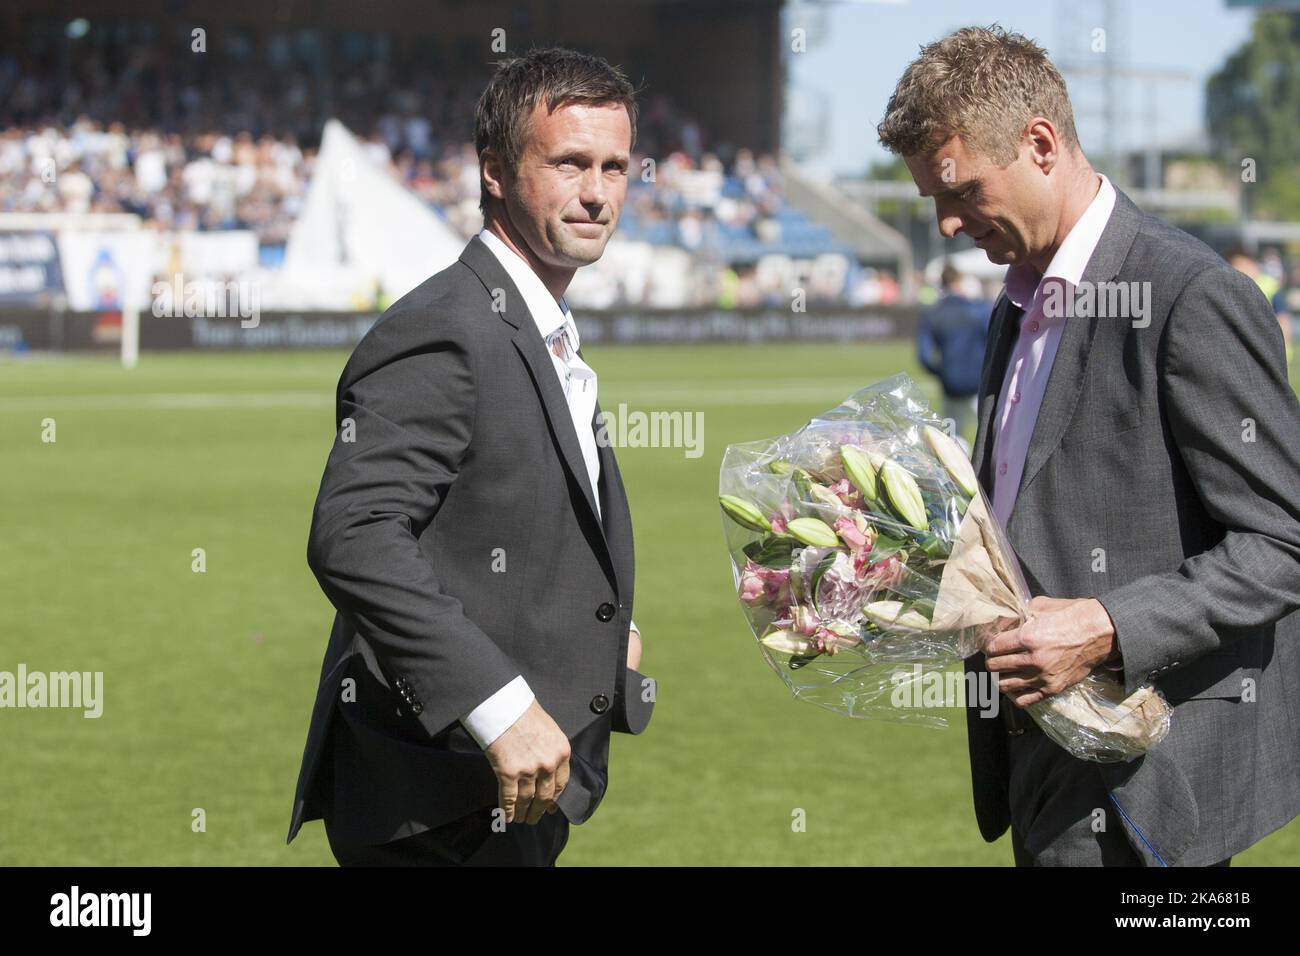 Outgoing manager of Stromsgodset FK and incoming manager of Scottish Premiership club Celtic Ronny Deila (L) is given flowers by Director of Football in Stromsgodset, Jostein Flo after half time of the match between Deila`s former club Stromsgodset and Haugesund in the Norwegian top football league in Drammen, 9 June 2014. Photo by Audun Braastad, NTB scanpix Stock Photo